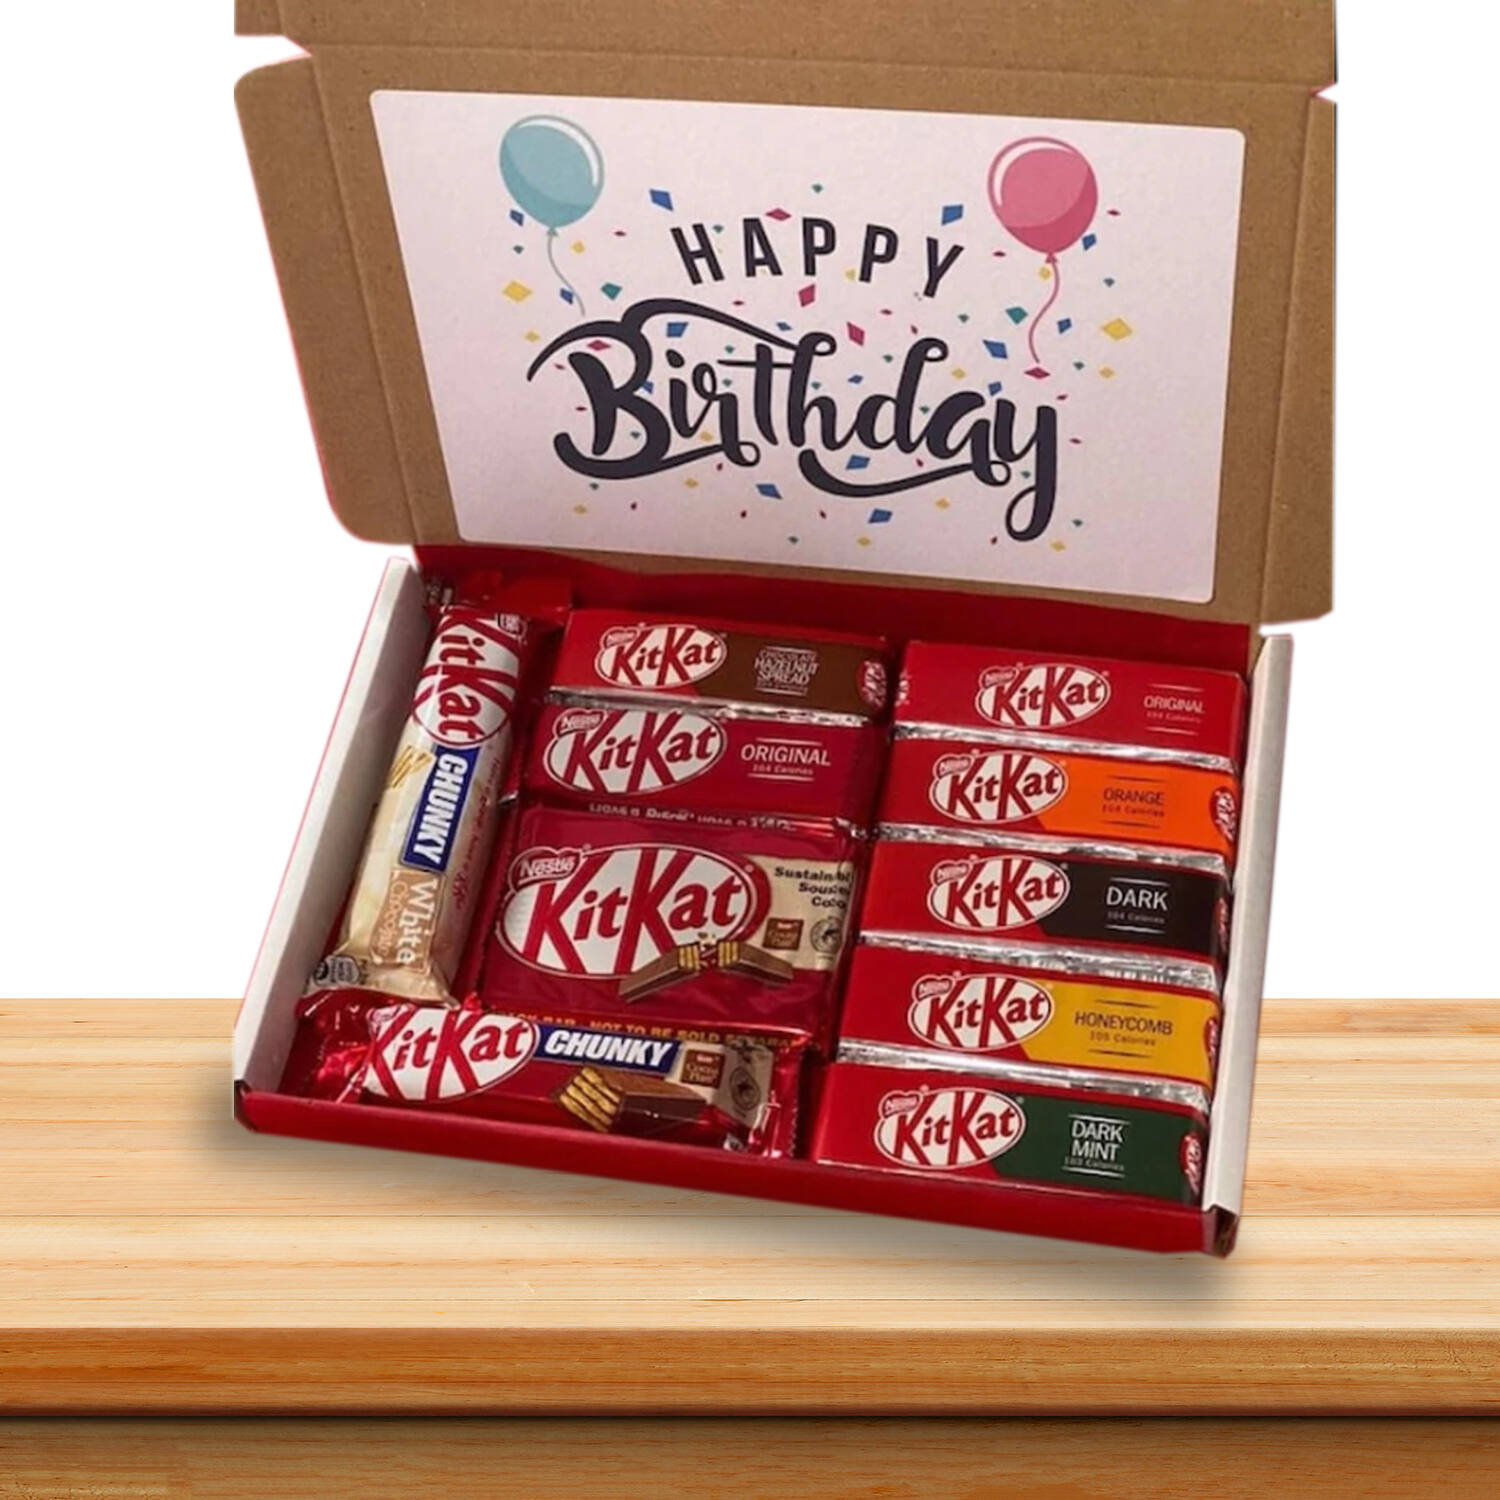 Buy Kitkat Chocolate Bouquet Kit Kat Gift Birthday Gift Thinking of You  Thank You, Congratulations Hamper, Get Well, Christmas Gift Online in India  - Etsy